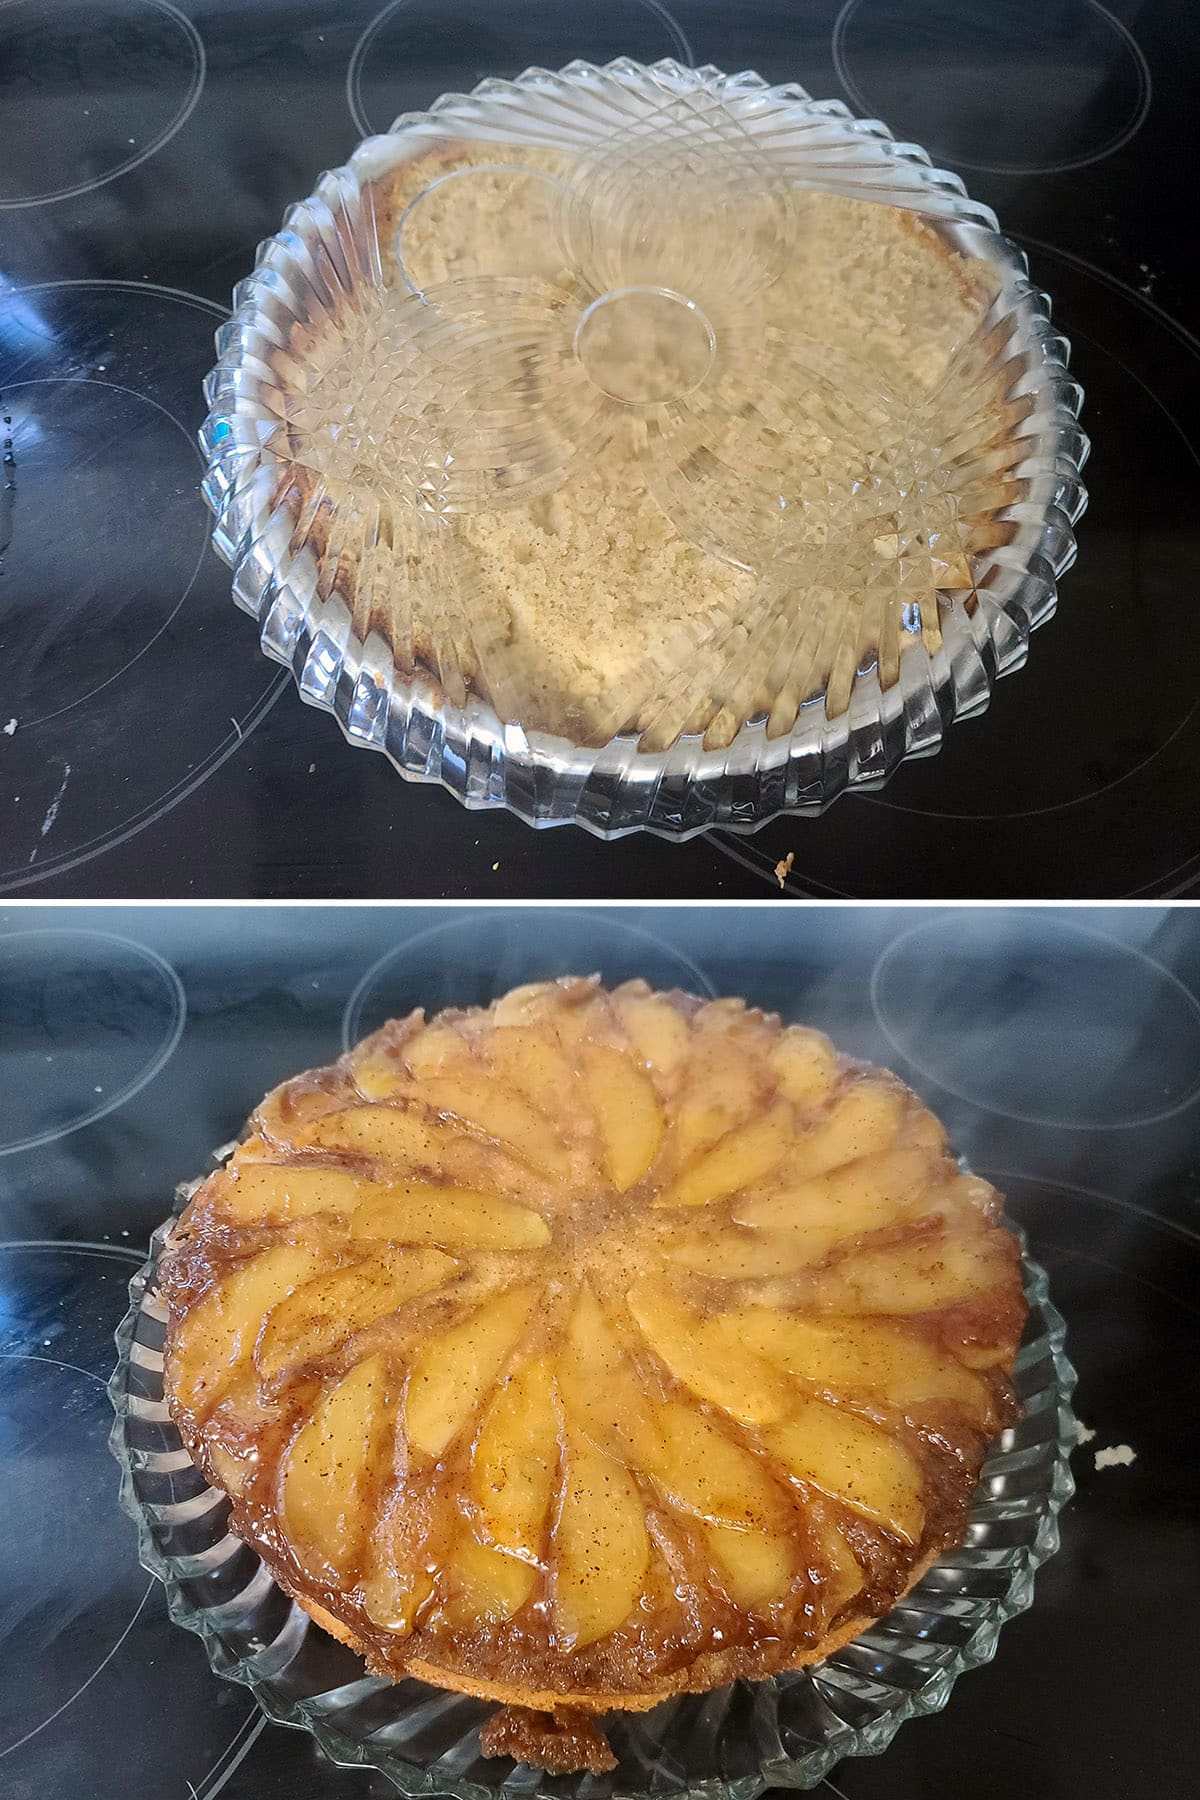 A 2 part image showing a glass plate being inverted over the cake pan, and the cake turned out onto the plate.